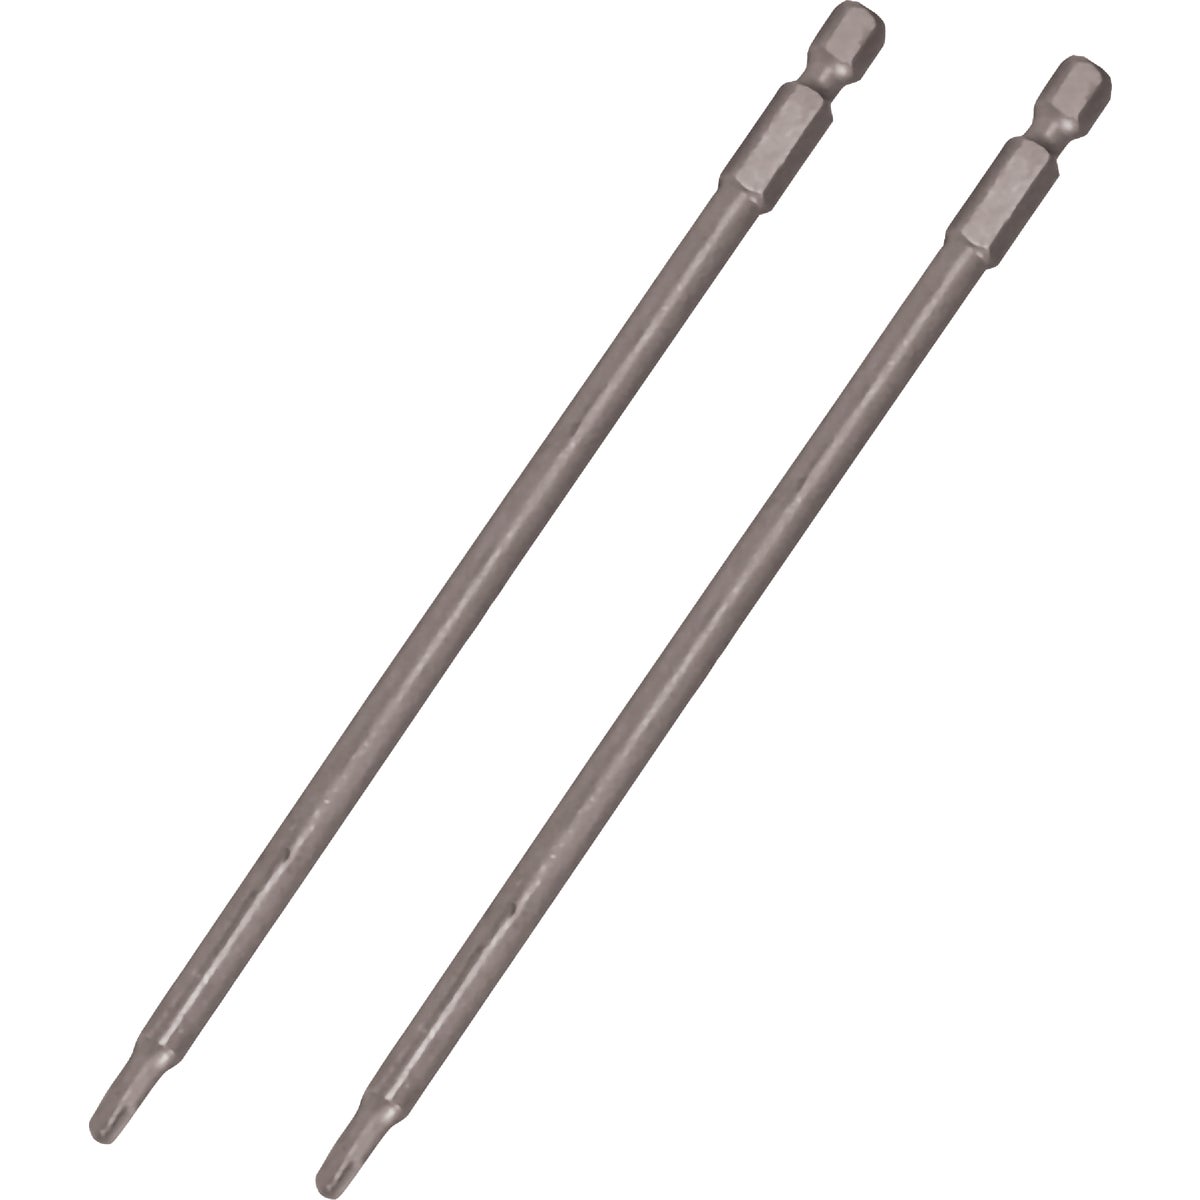 Item 320773, All Kreg drivers features a solid one-piece construction, magnetic tip, and